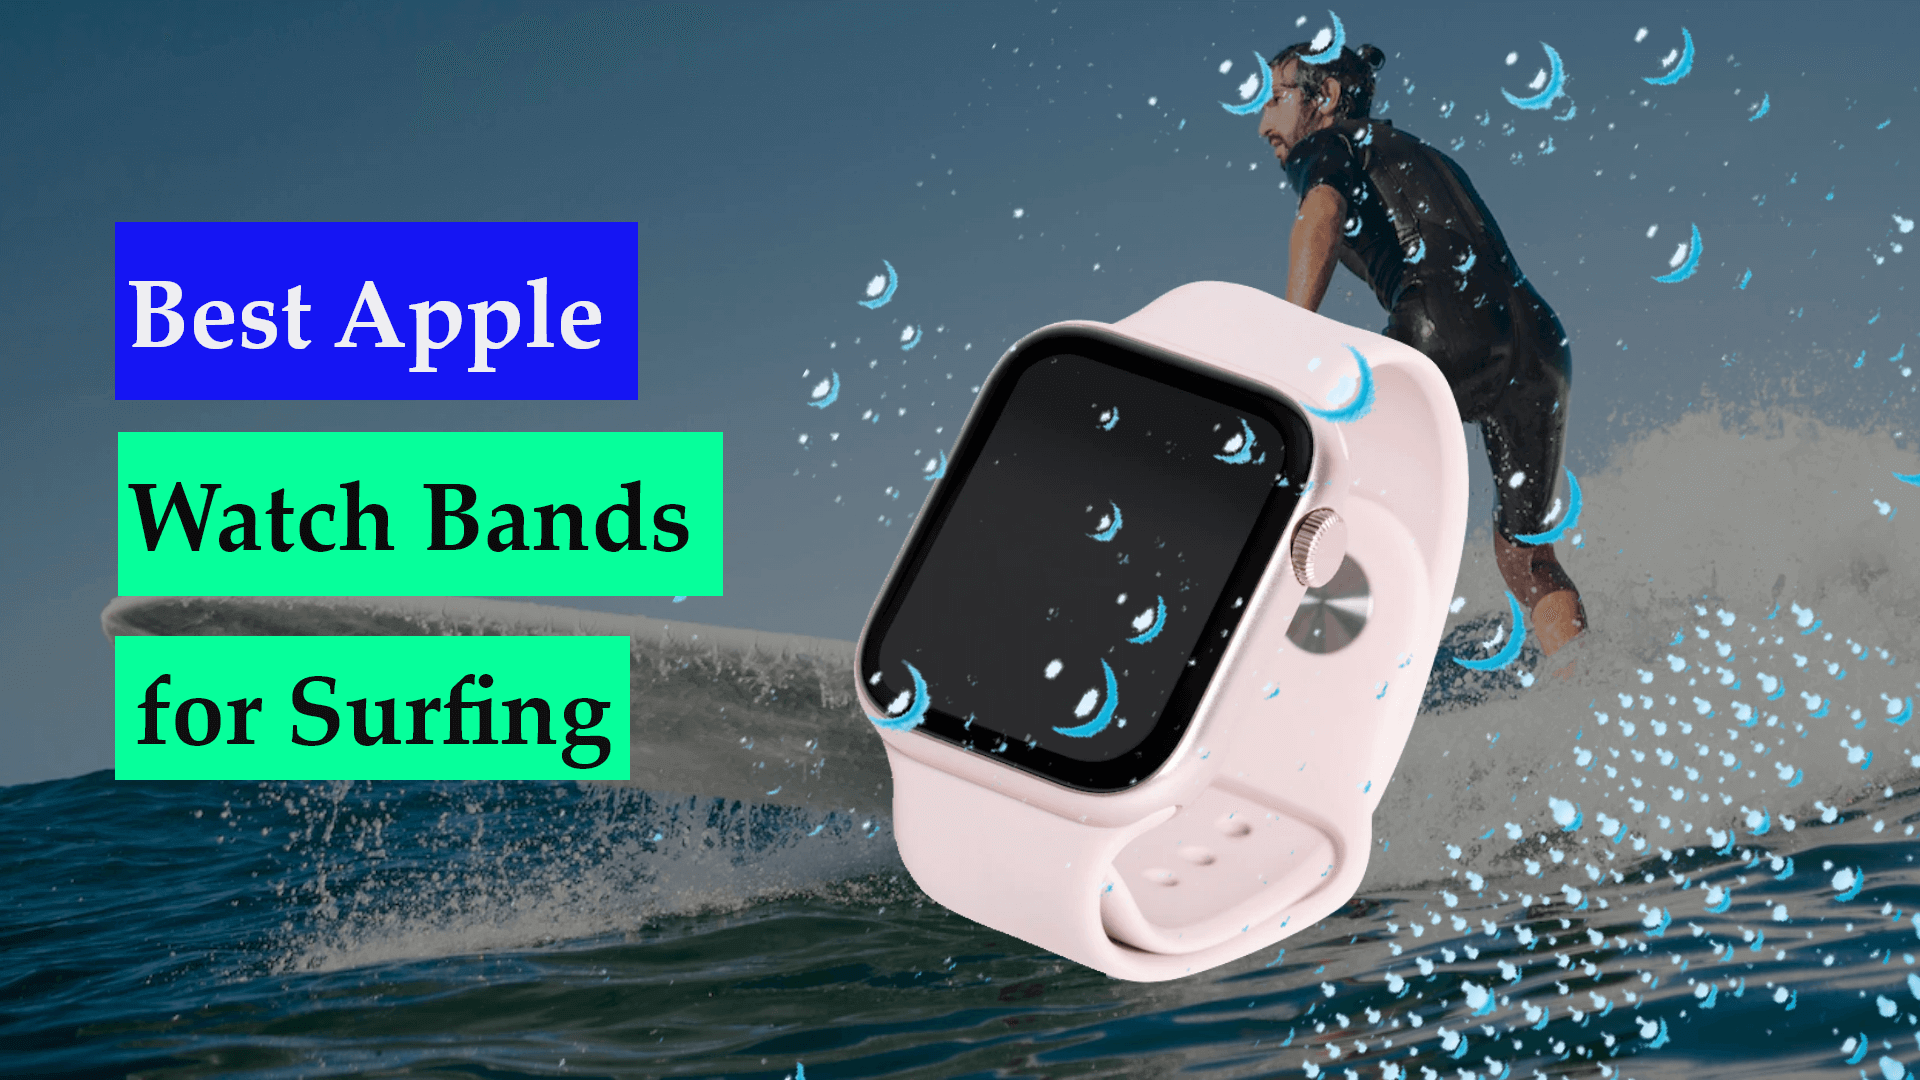 10 Best Apple Watch Bands for Surfing in 2023